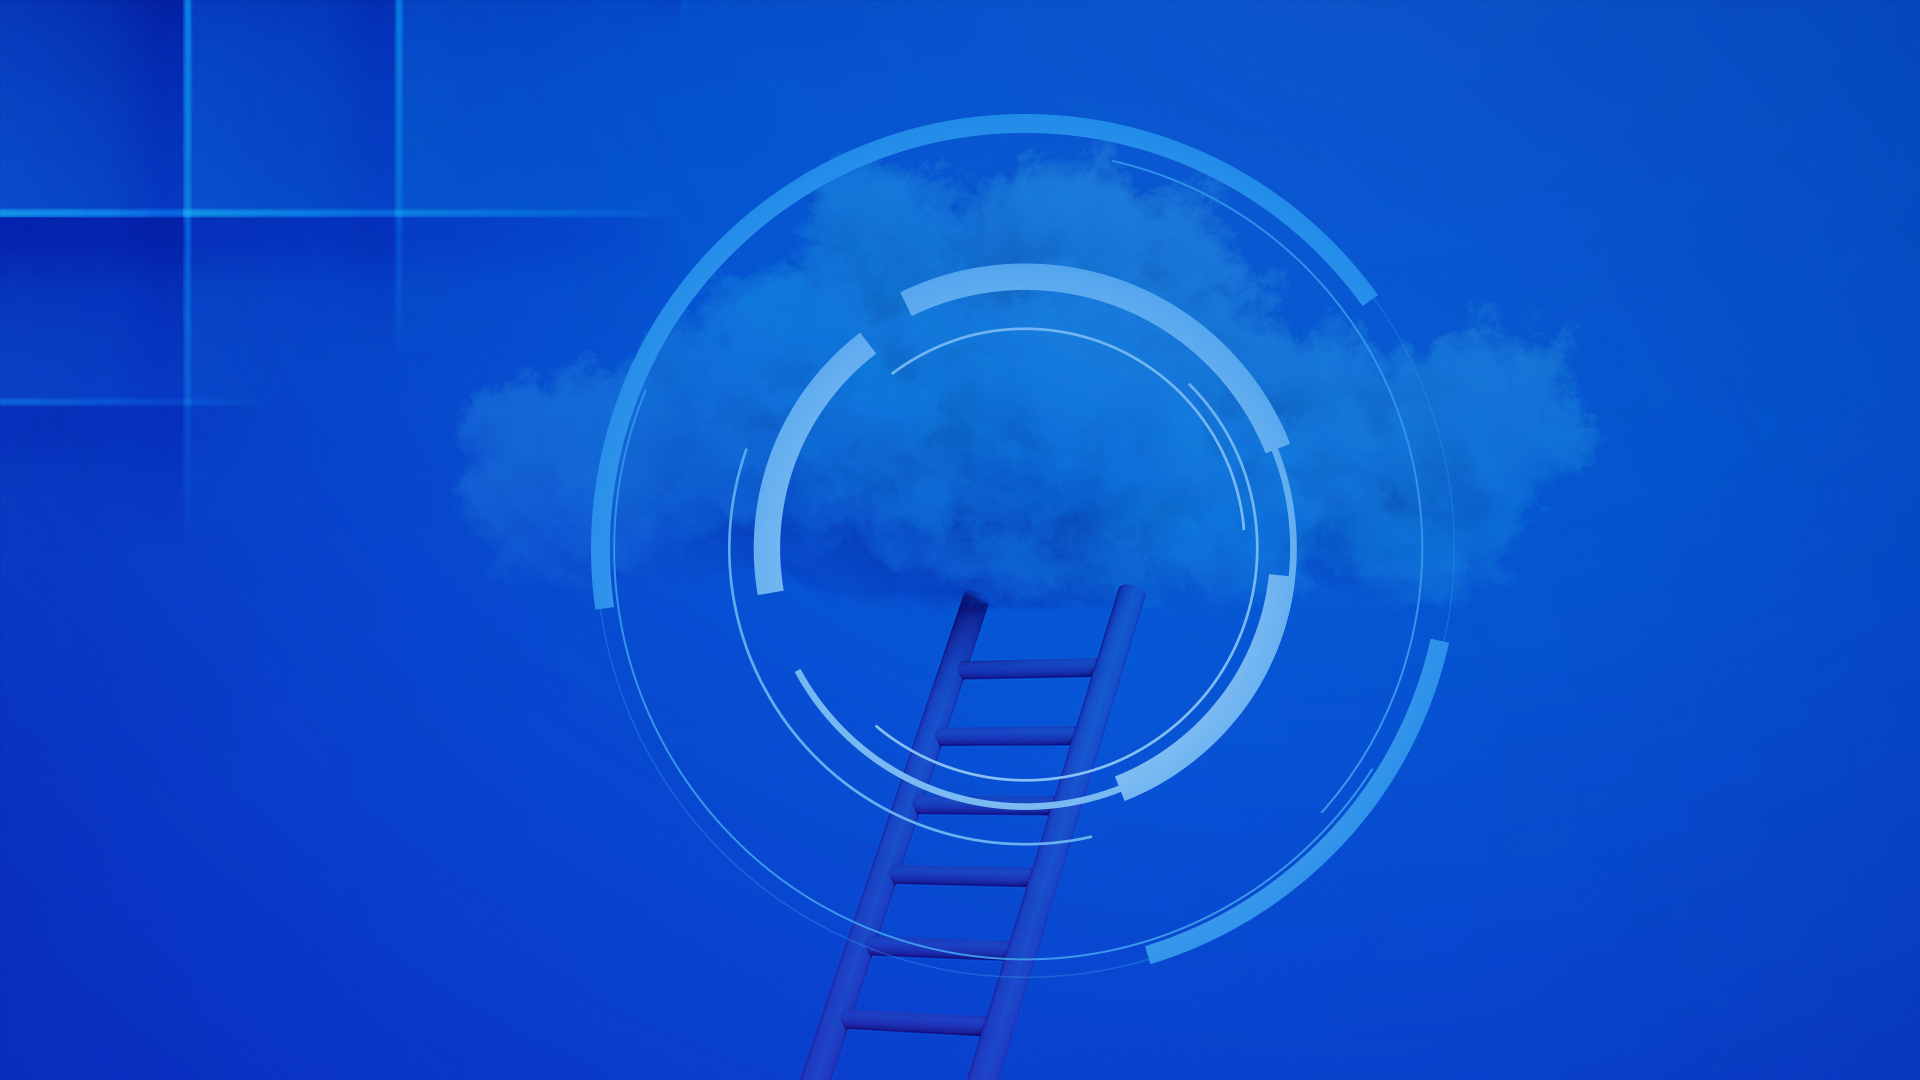 Ladder into the Clouds